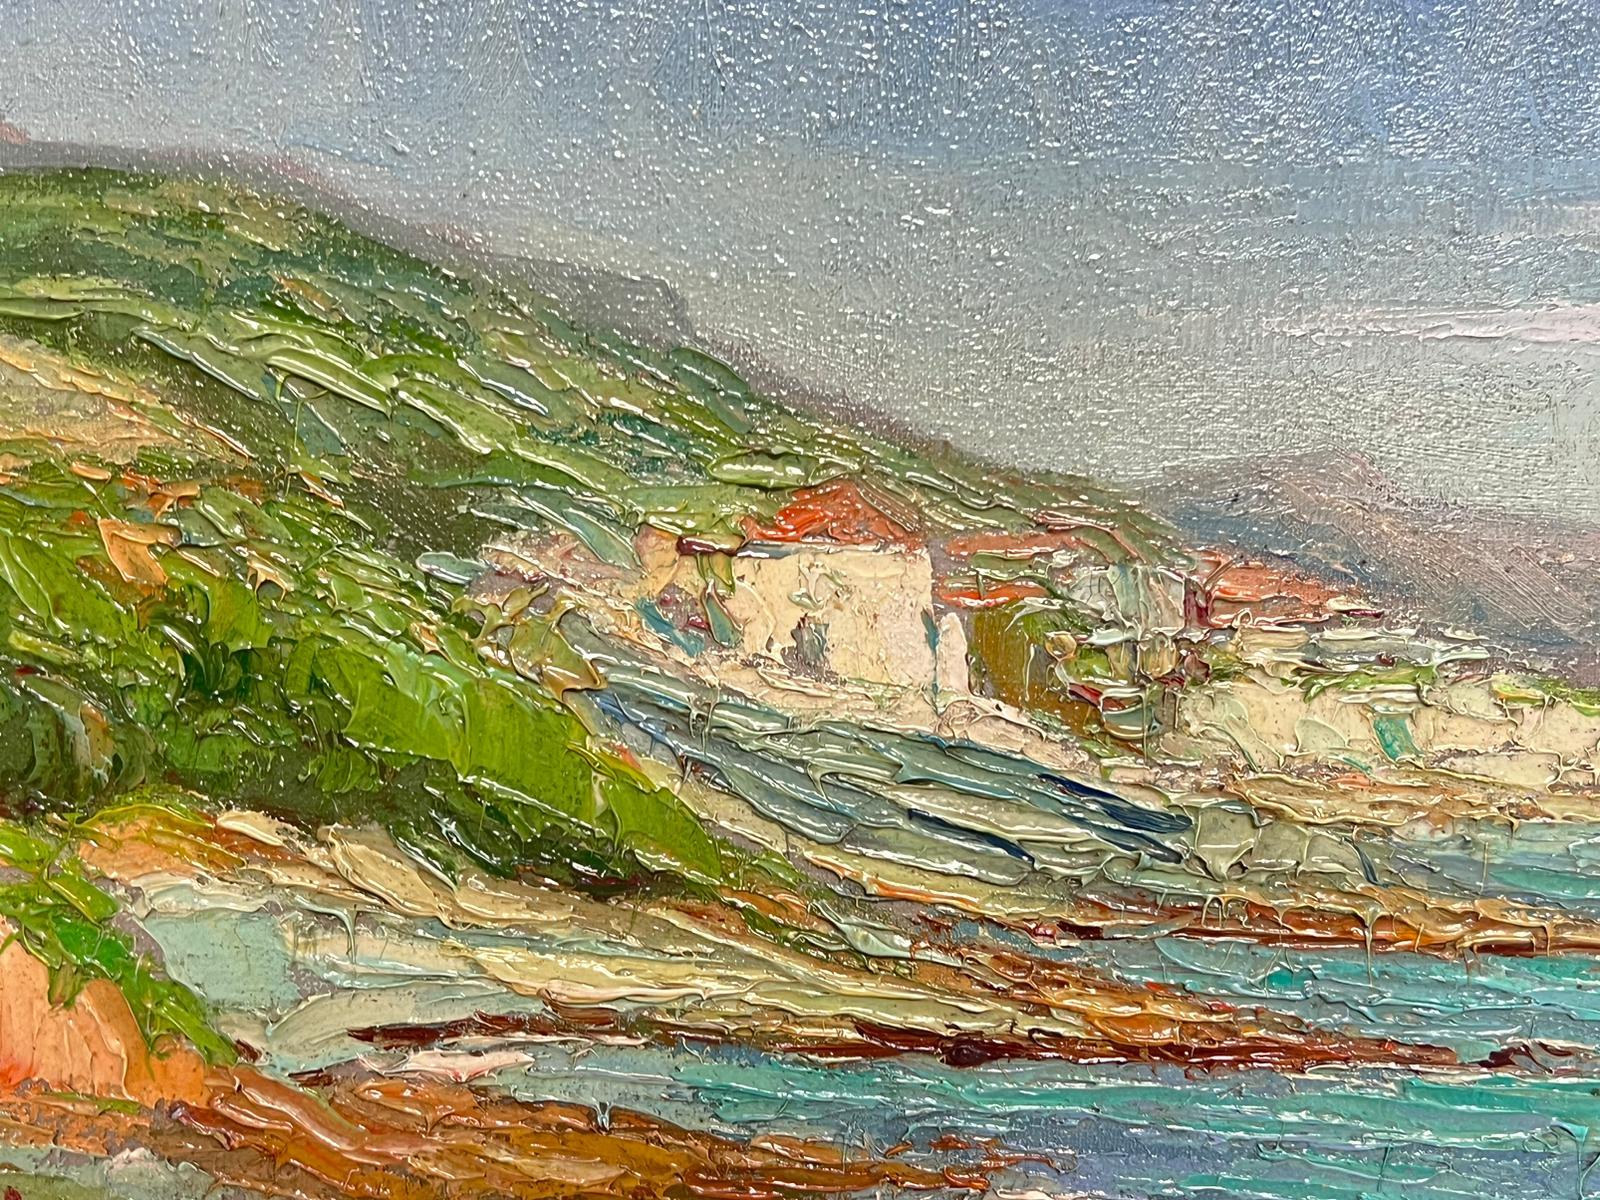 The Italian Coast
Italian School, circa 1900's
indistinctly signed oil on canvas, unframed
canvas : 9.75 x 16.5 inches
provenance: private collection
condition: very good and sound condition